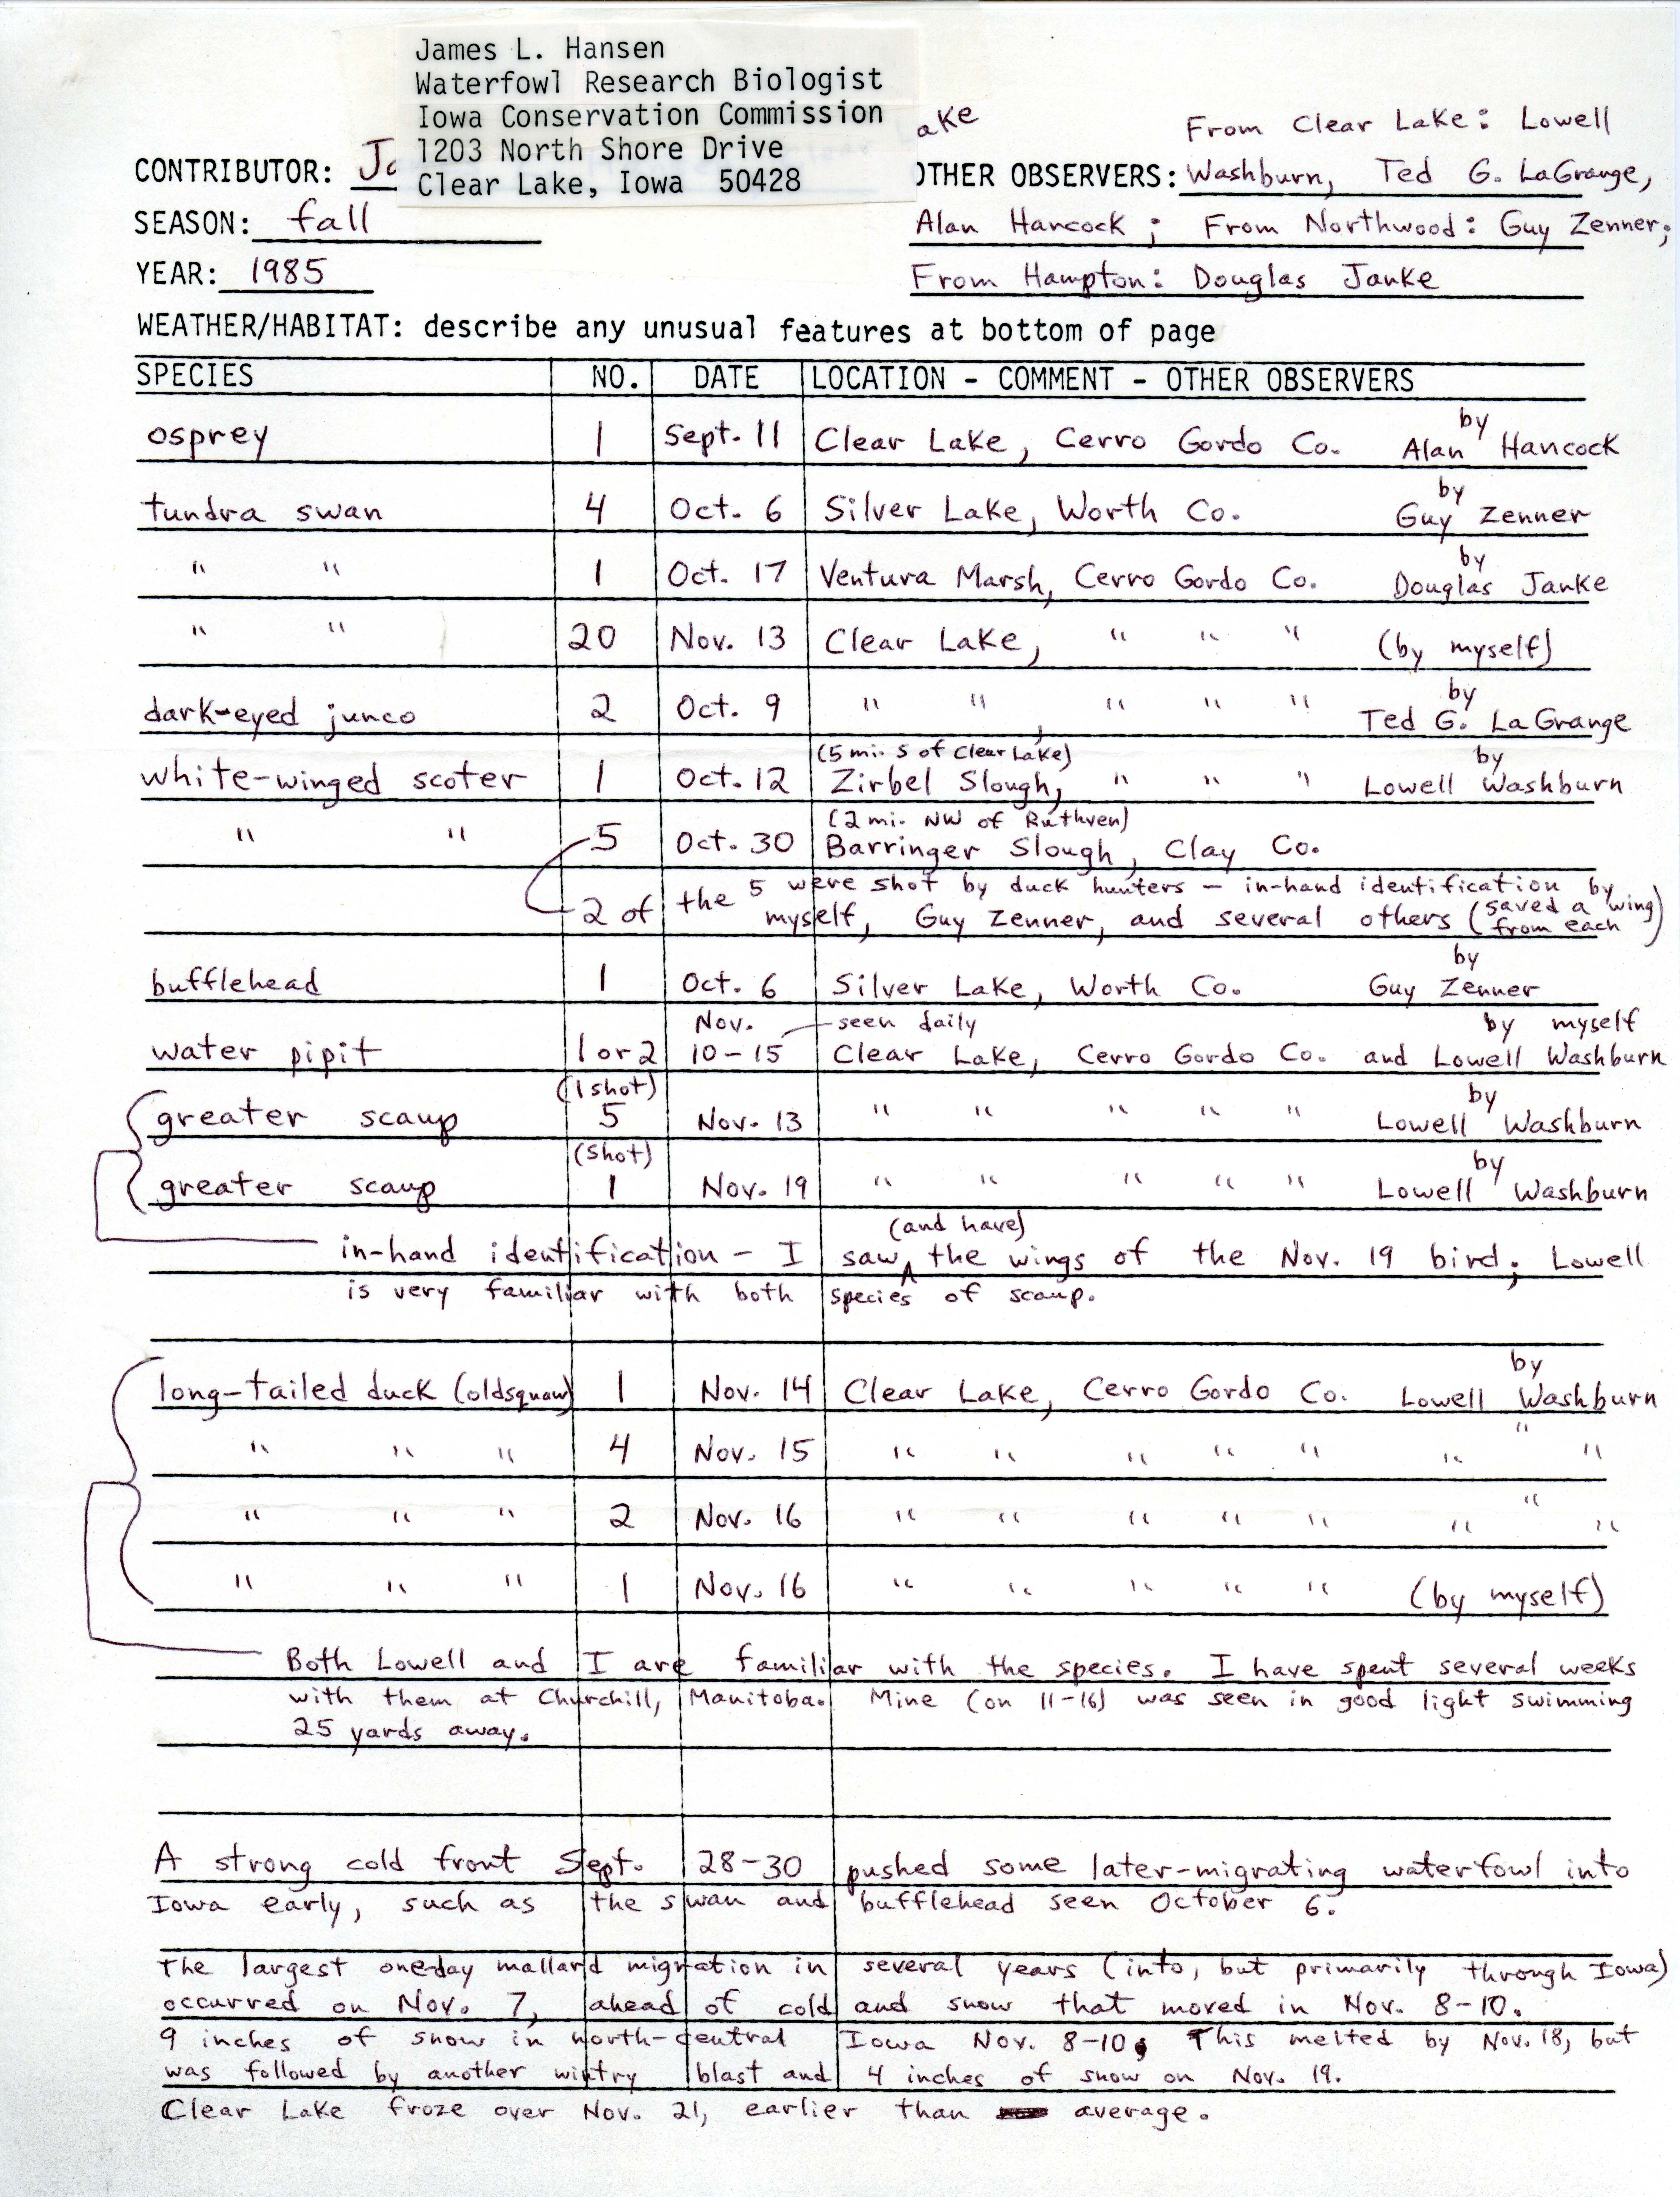 Annotated bird sighting list for Fall 1985 compiled by James Hansen